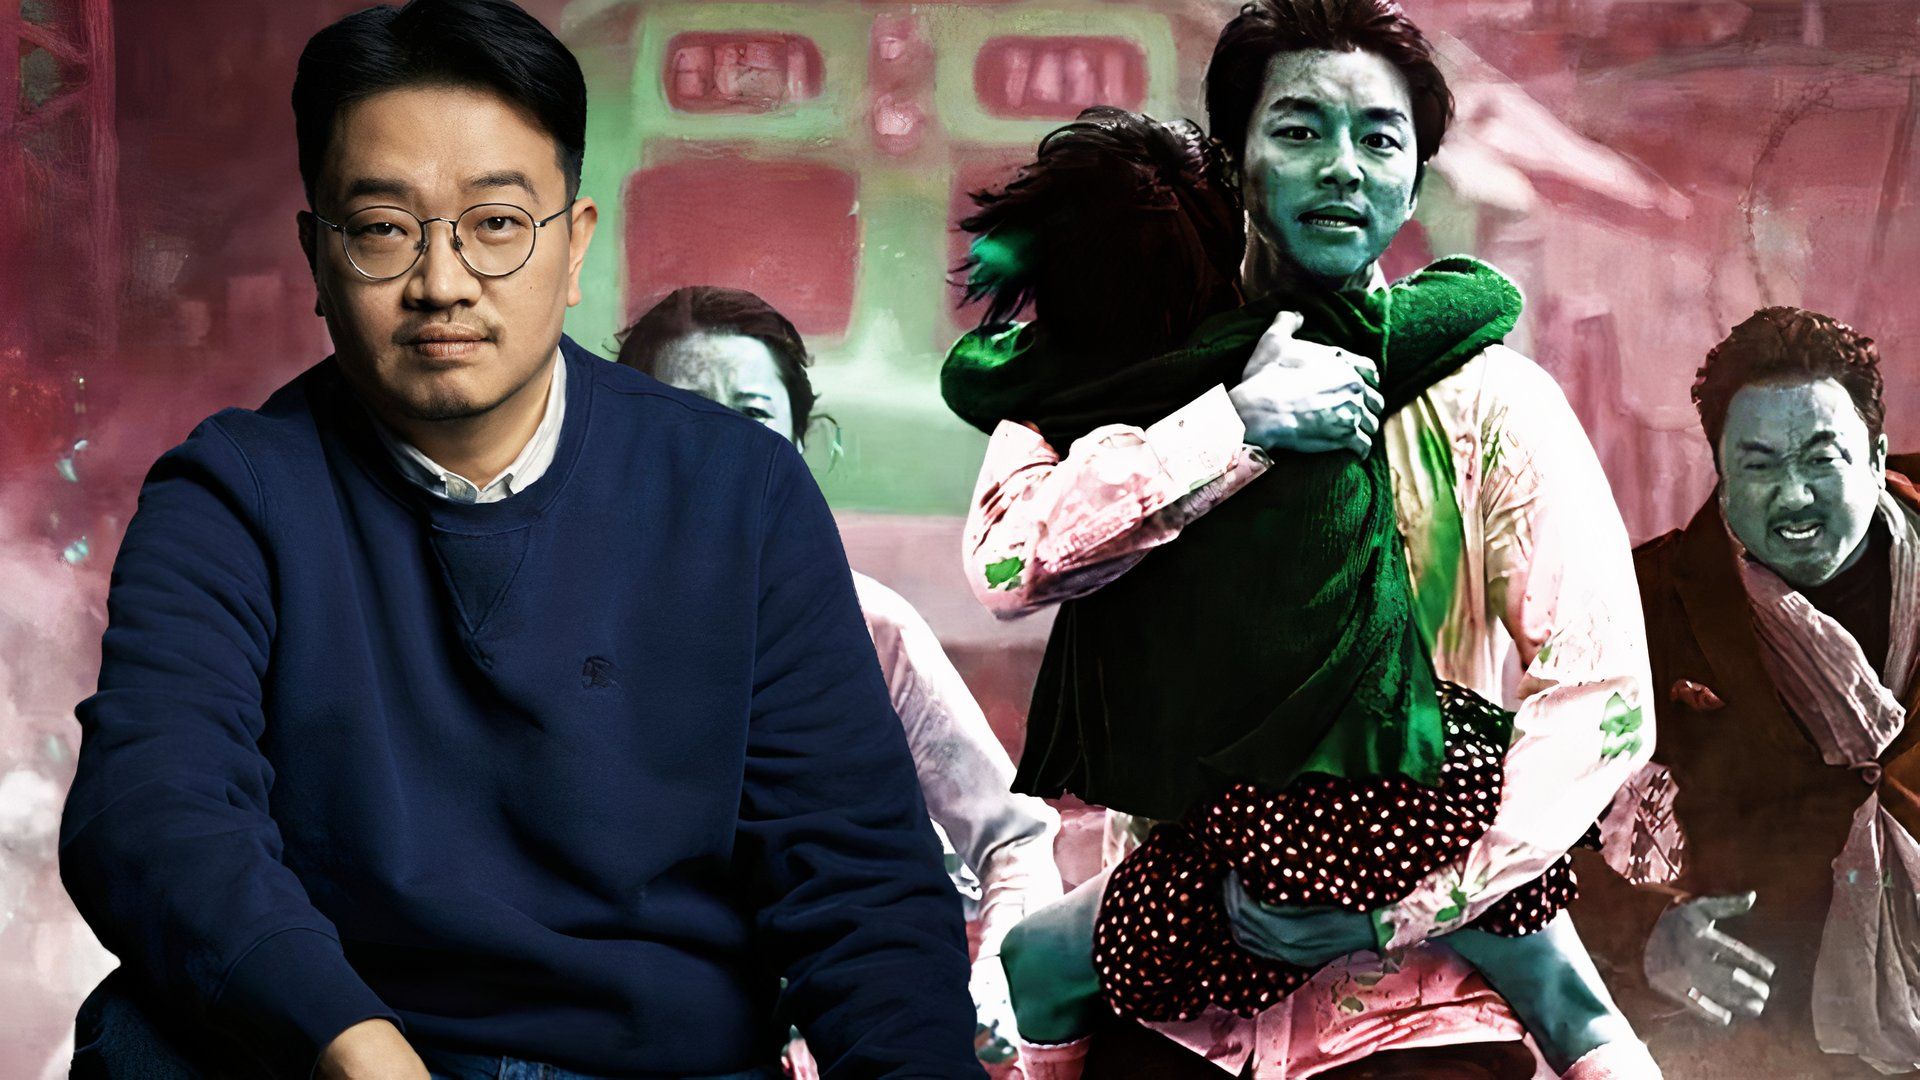 Director Yeon Sang-ho over an image from Train to Busan